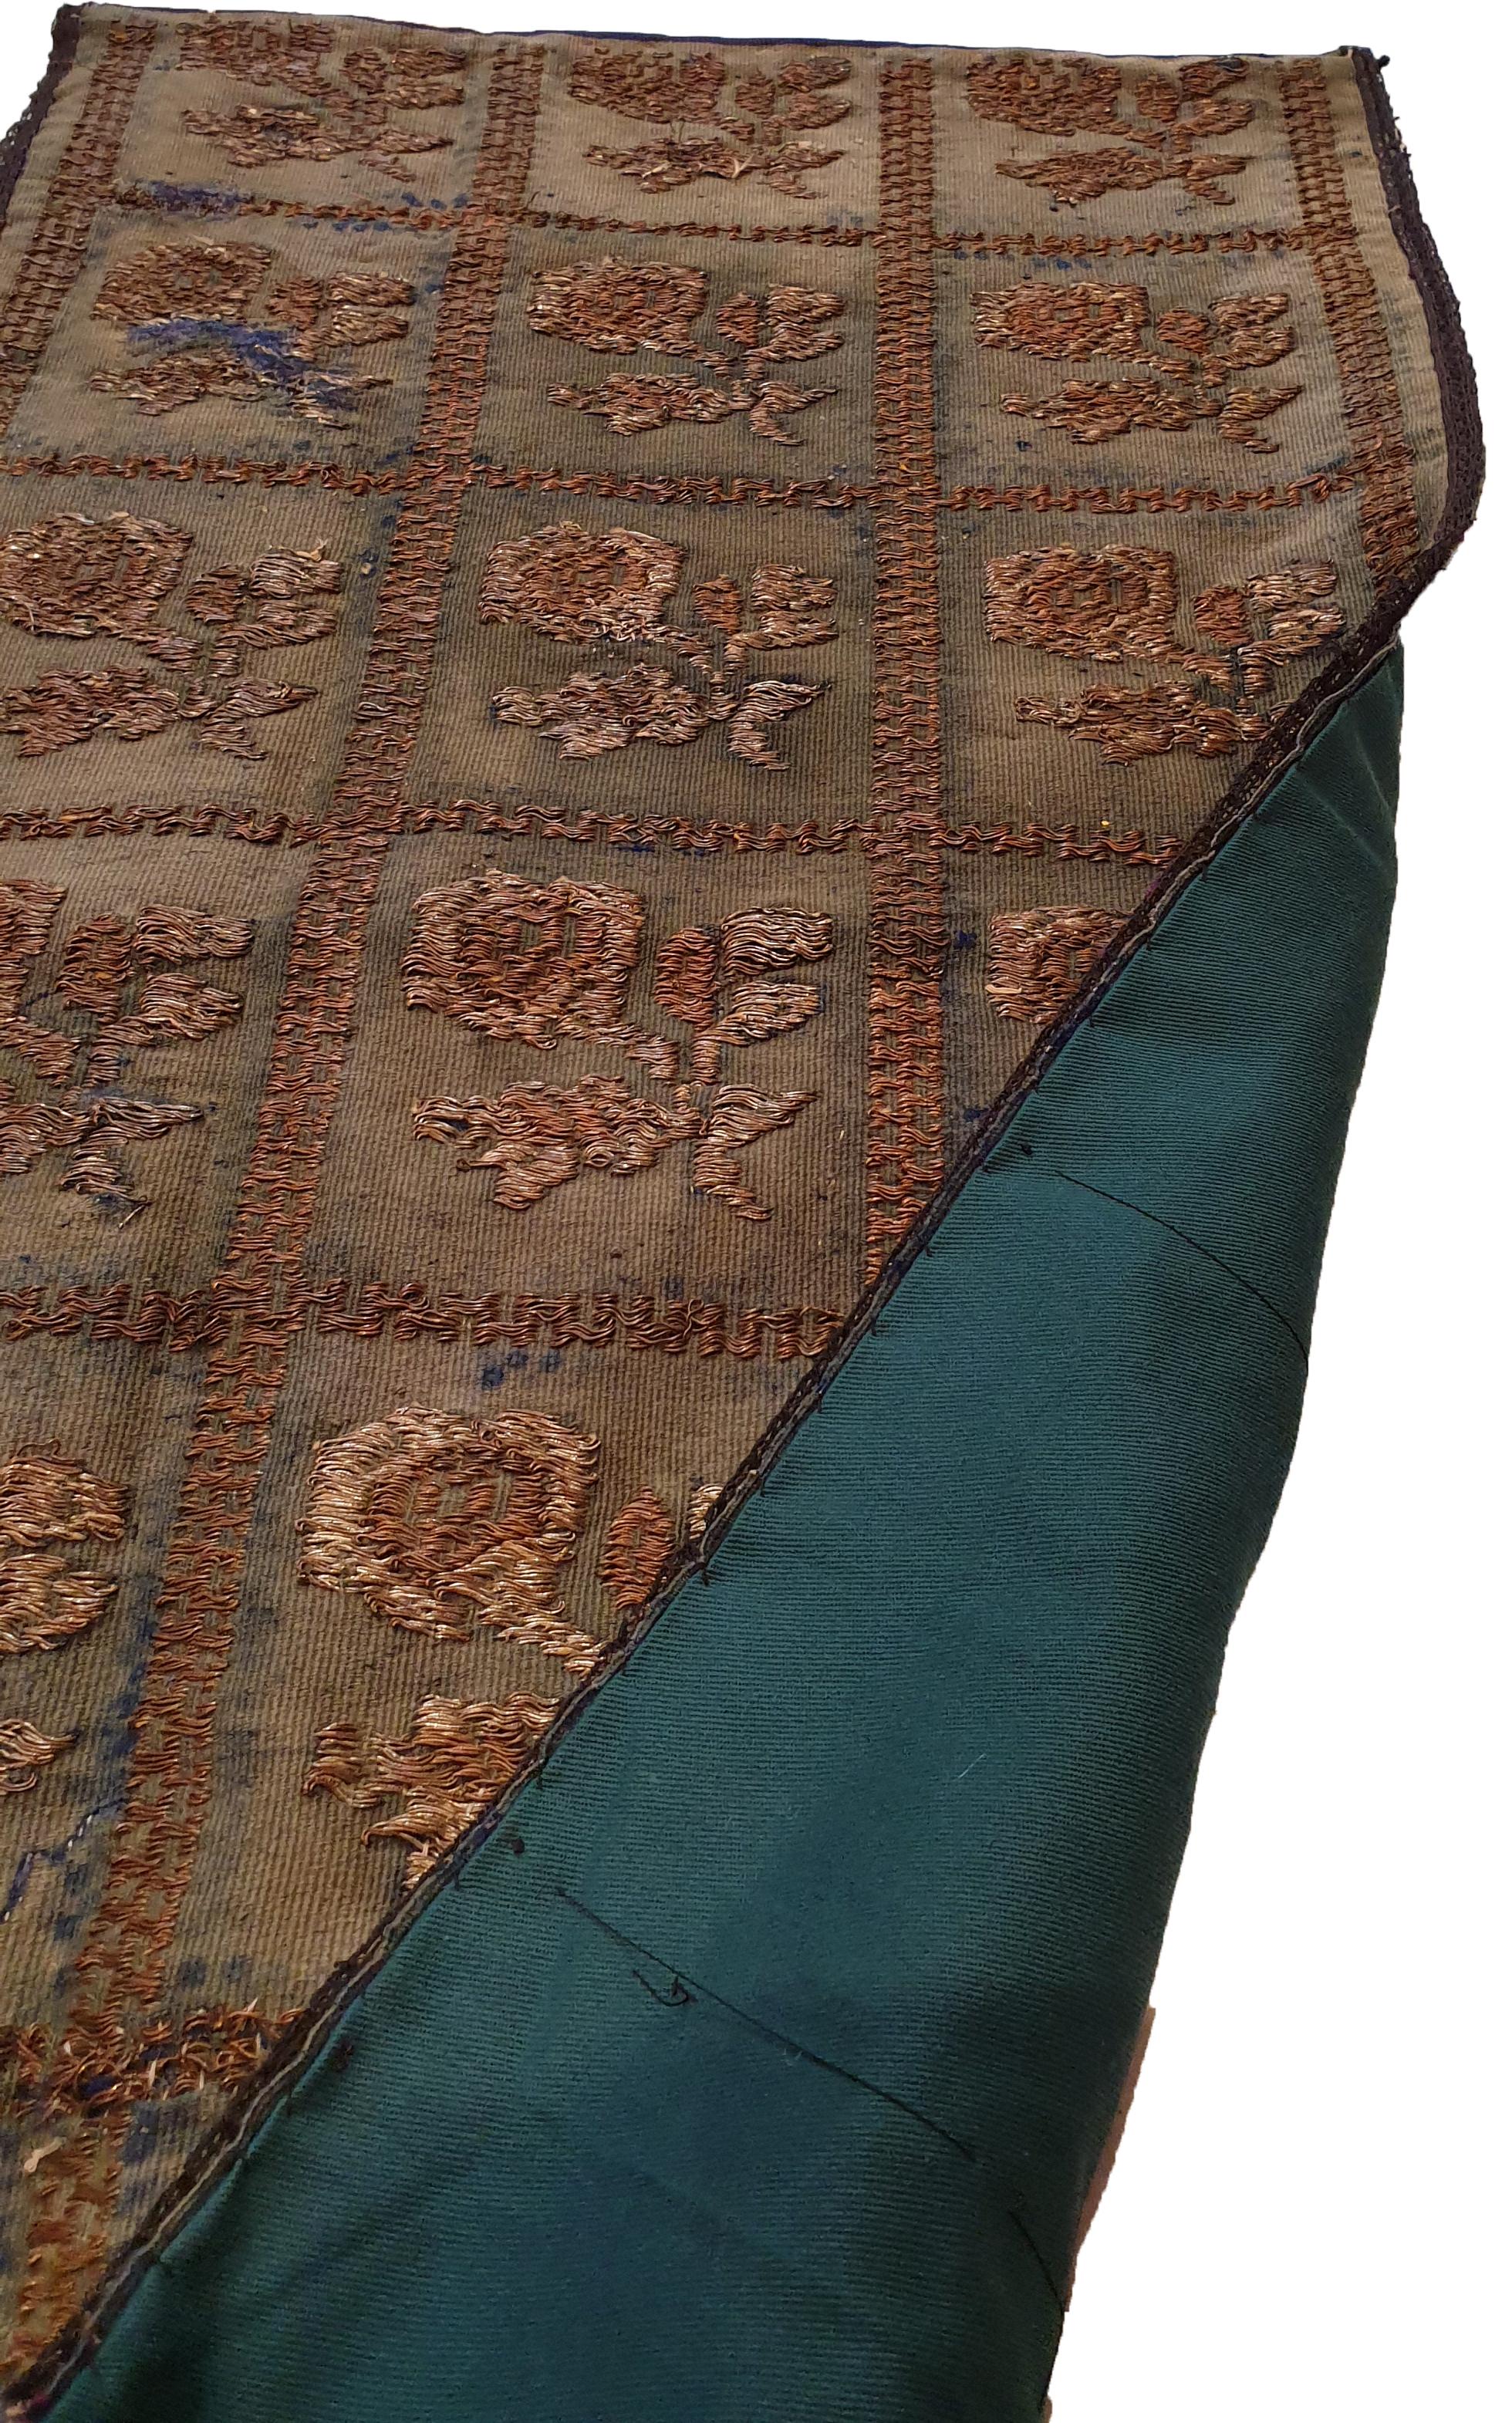 715 - Mid-19th Century Ottoman Embroidery In Excellent Condition For Sale In Paris, FR